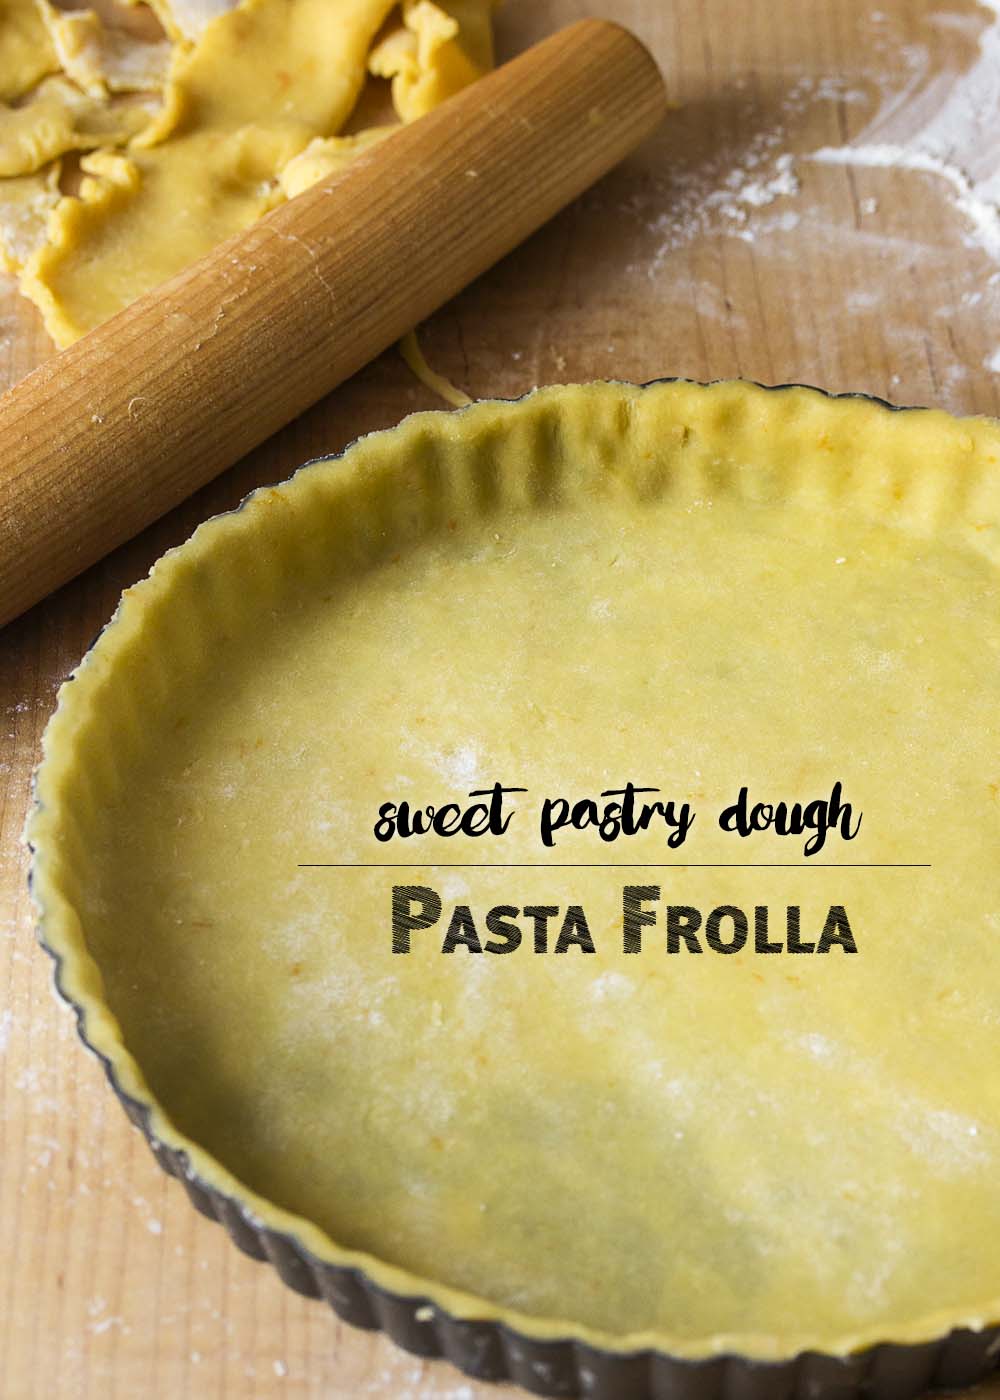 Looking for a pasta frolla recipe in English? I have a step by step method with pictures of the classic recipe for Italian sweet pastry dough. | justalittlebitofbacon.com